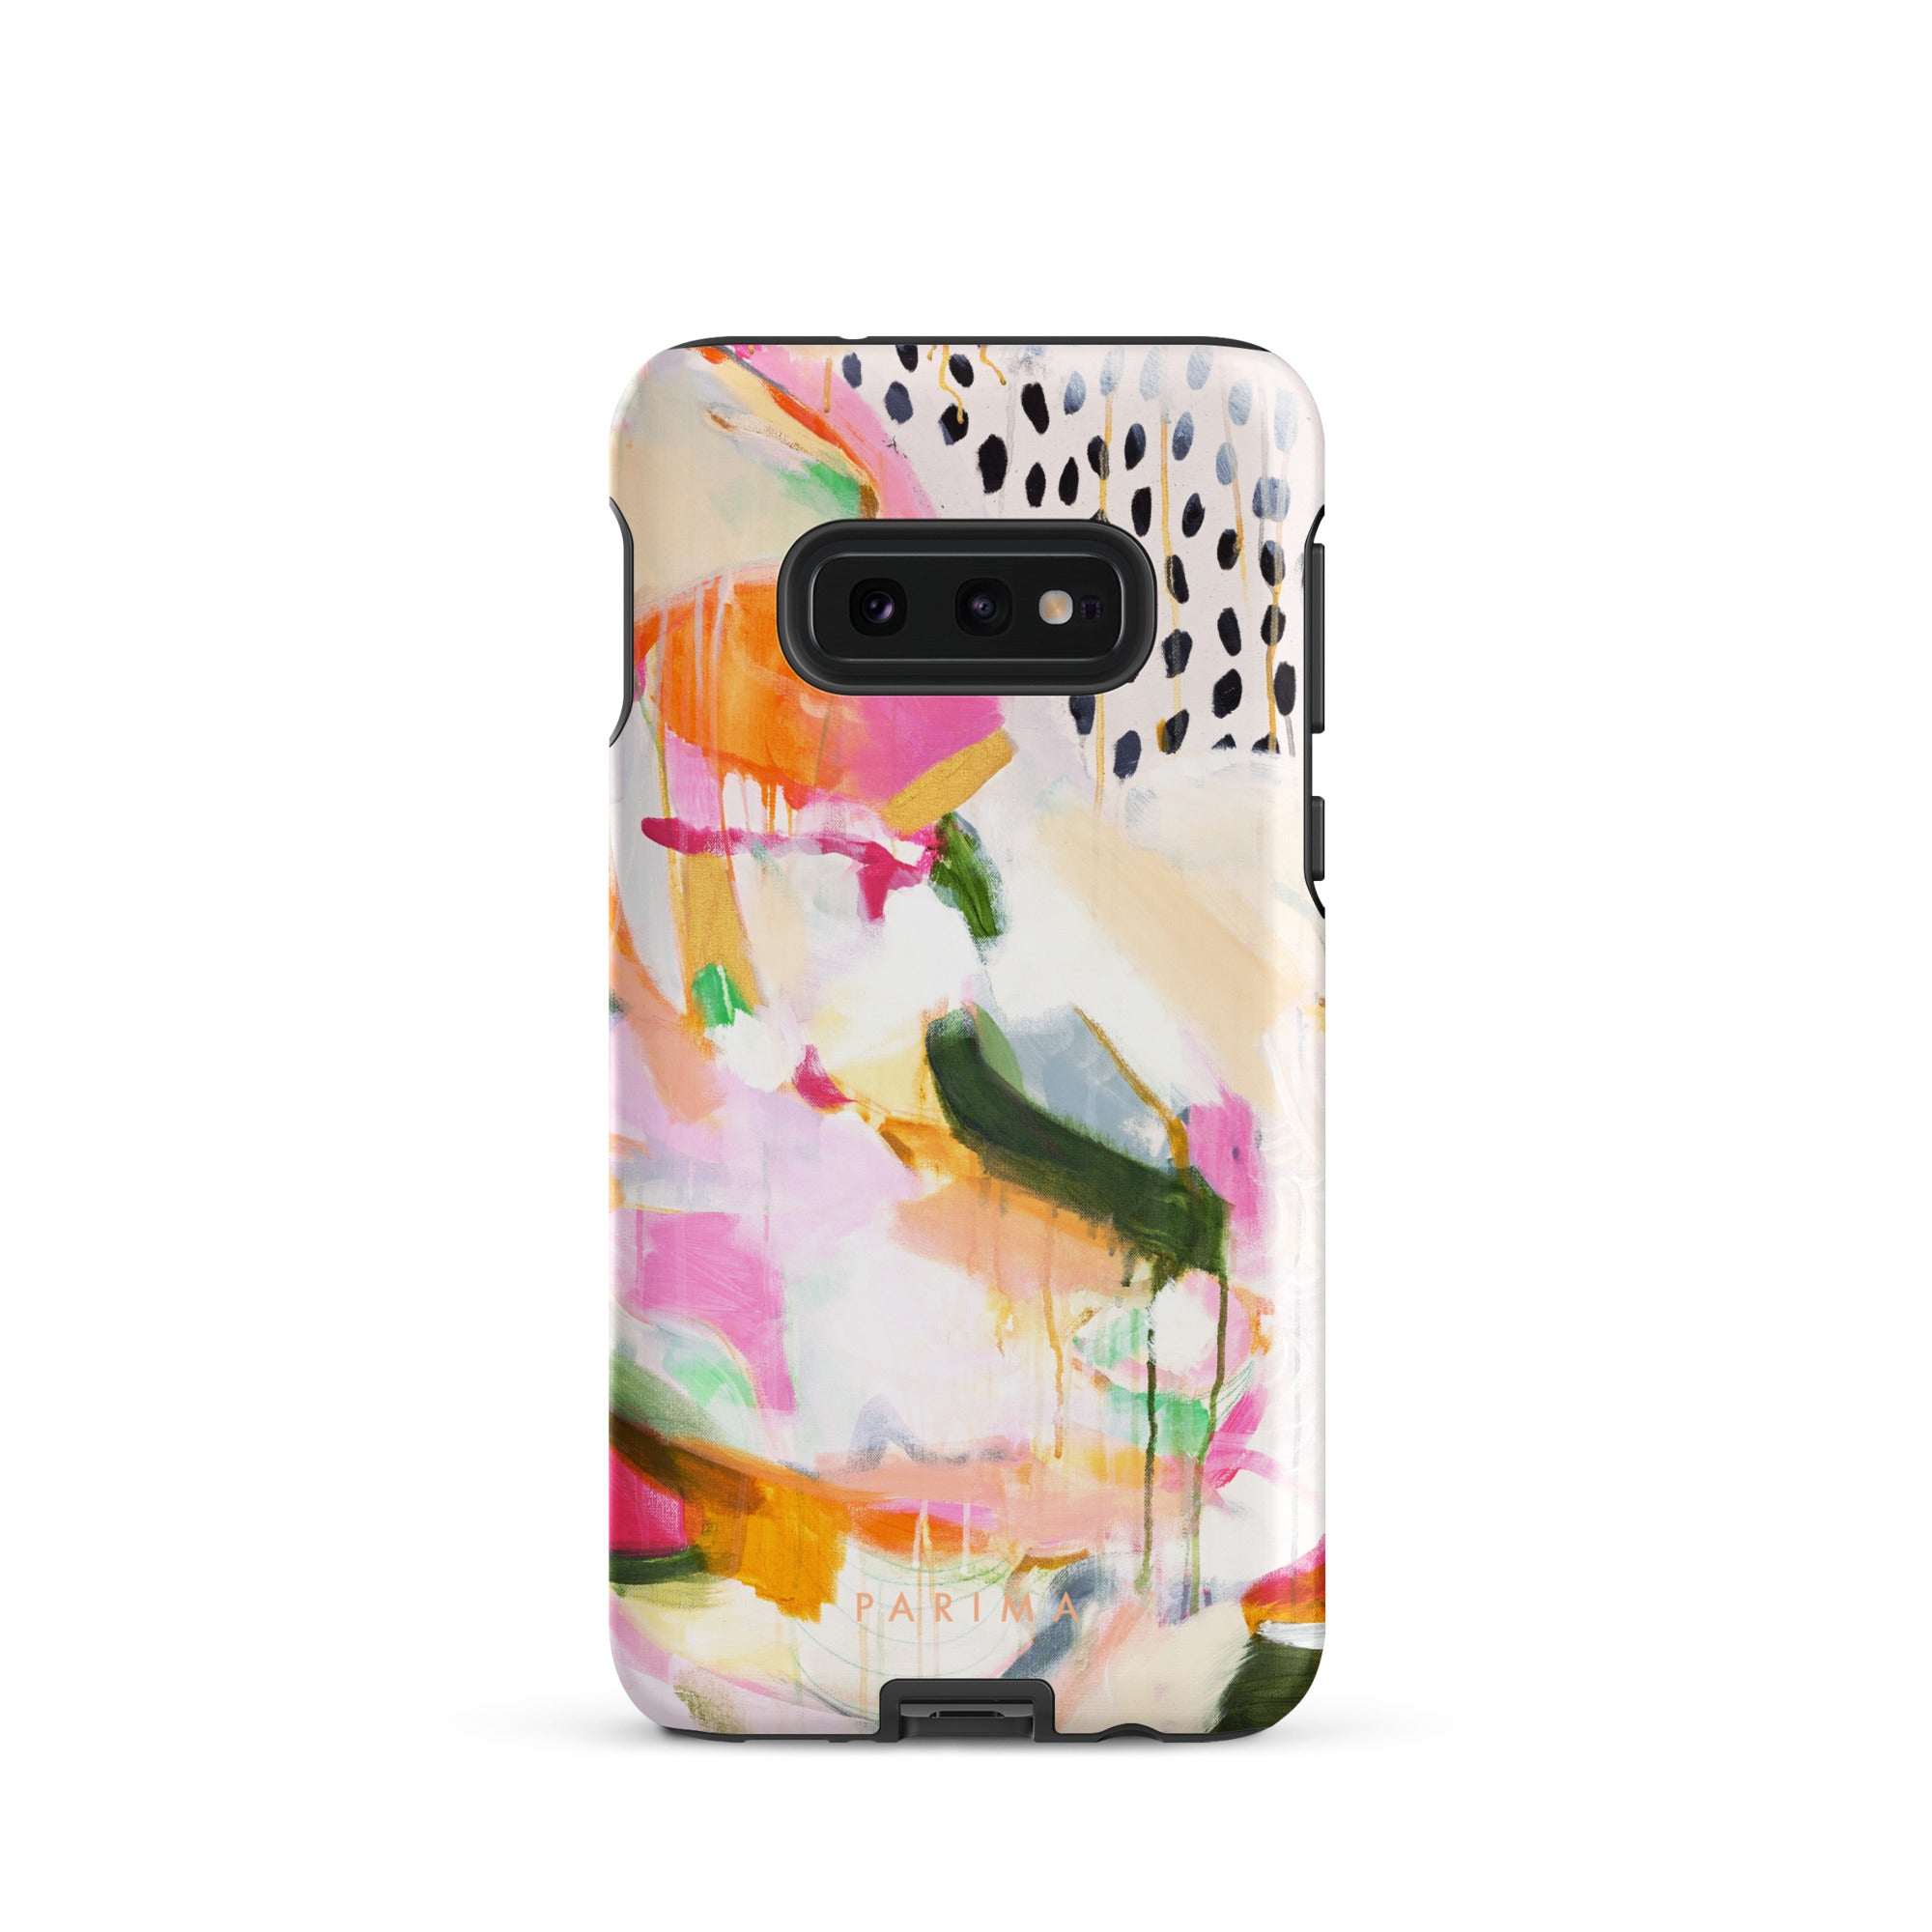 Adira, pink and green abstract art on Samsung Galaxy S10e tough case by Parima Studio